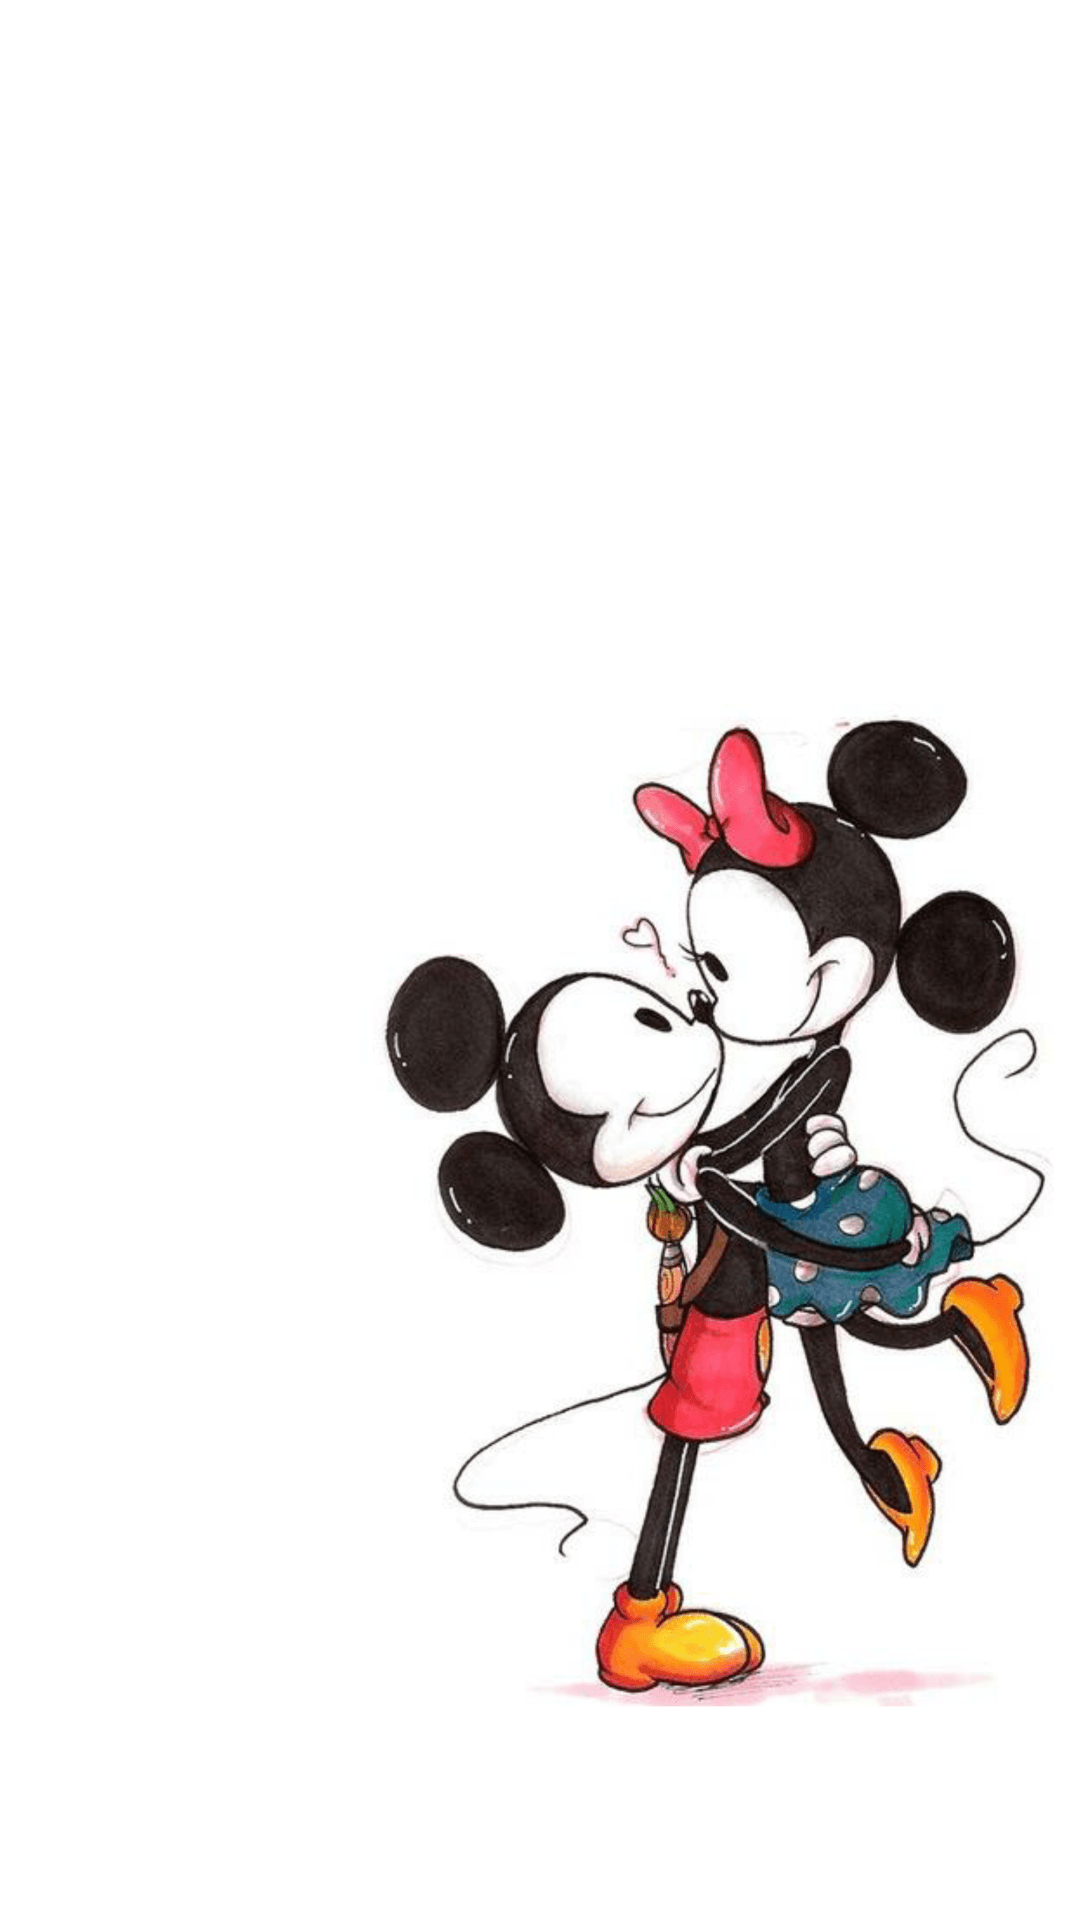 Mickey Mouse and Minnie Mouse kissing - Mickey Mouse